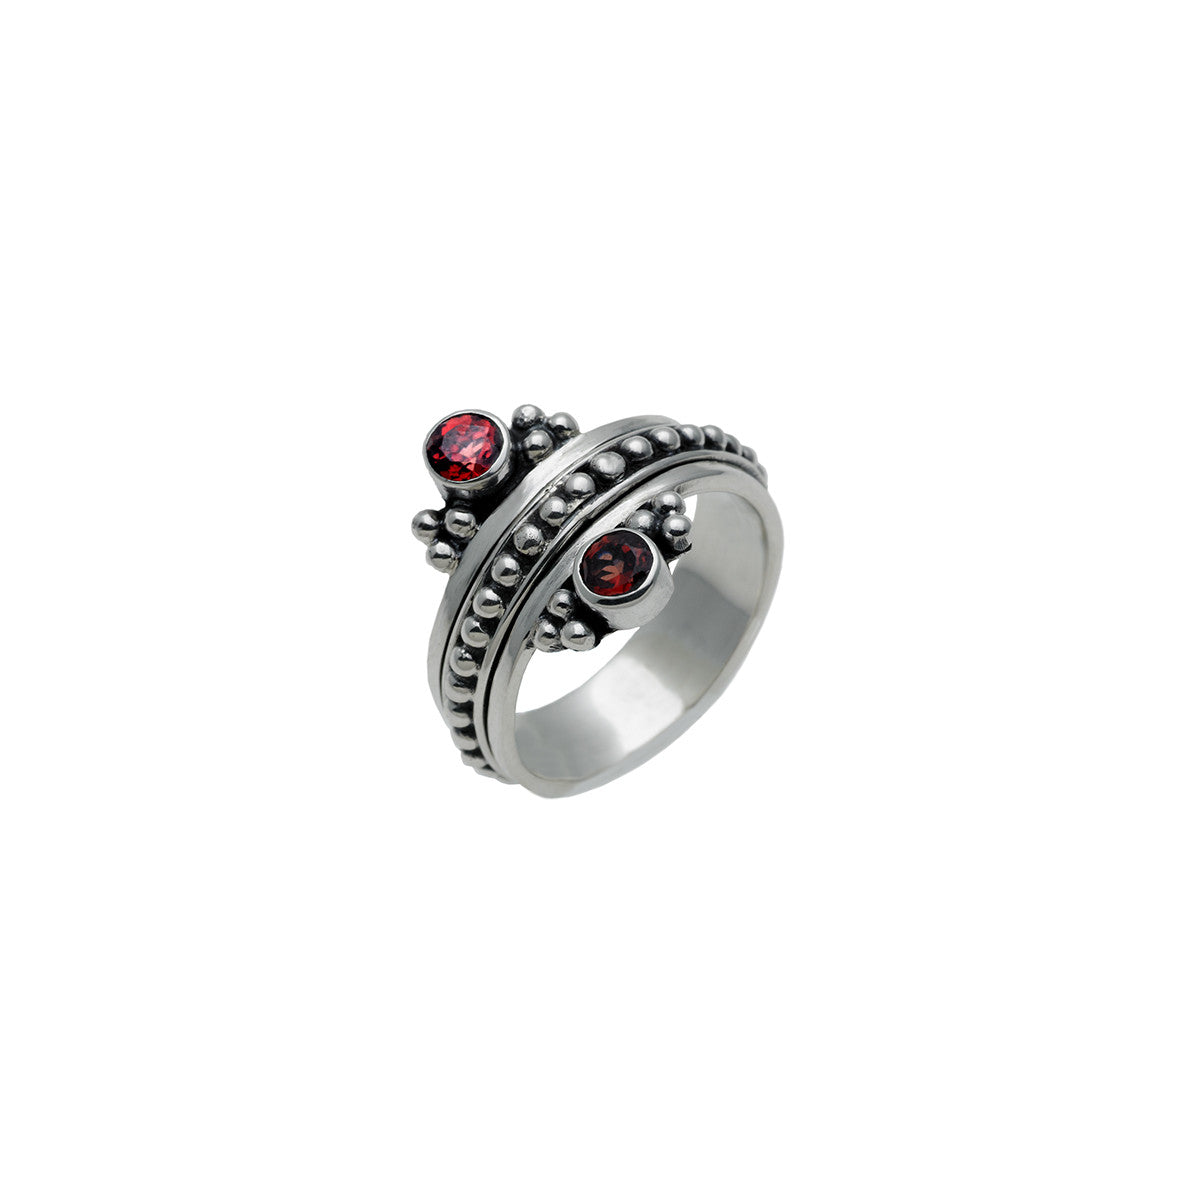 Metal Reflection Sterling Silver Garnet Spin Ring - Cynthia Gale New York Jewelry